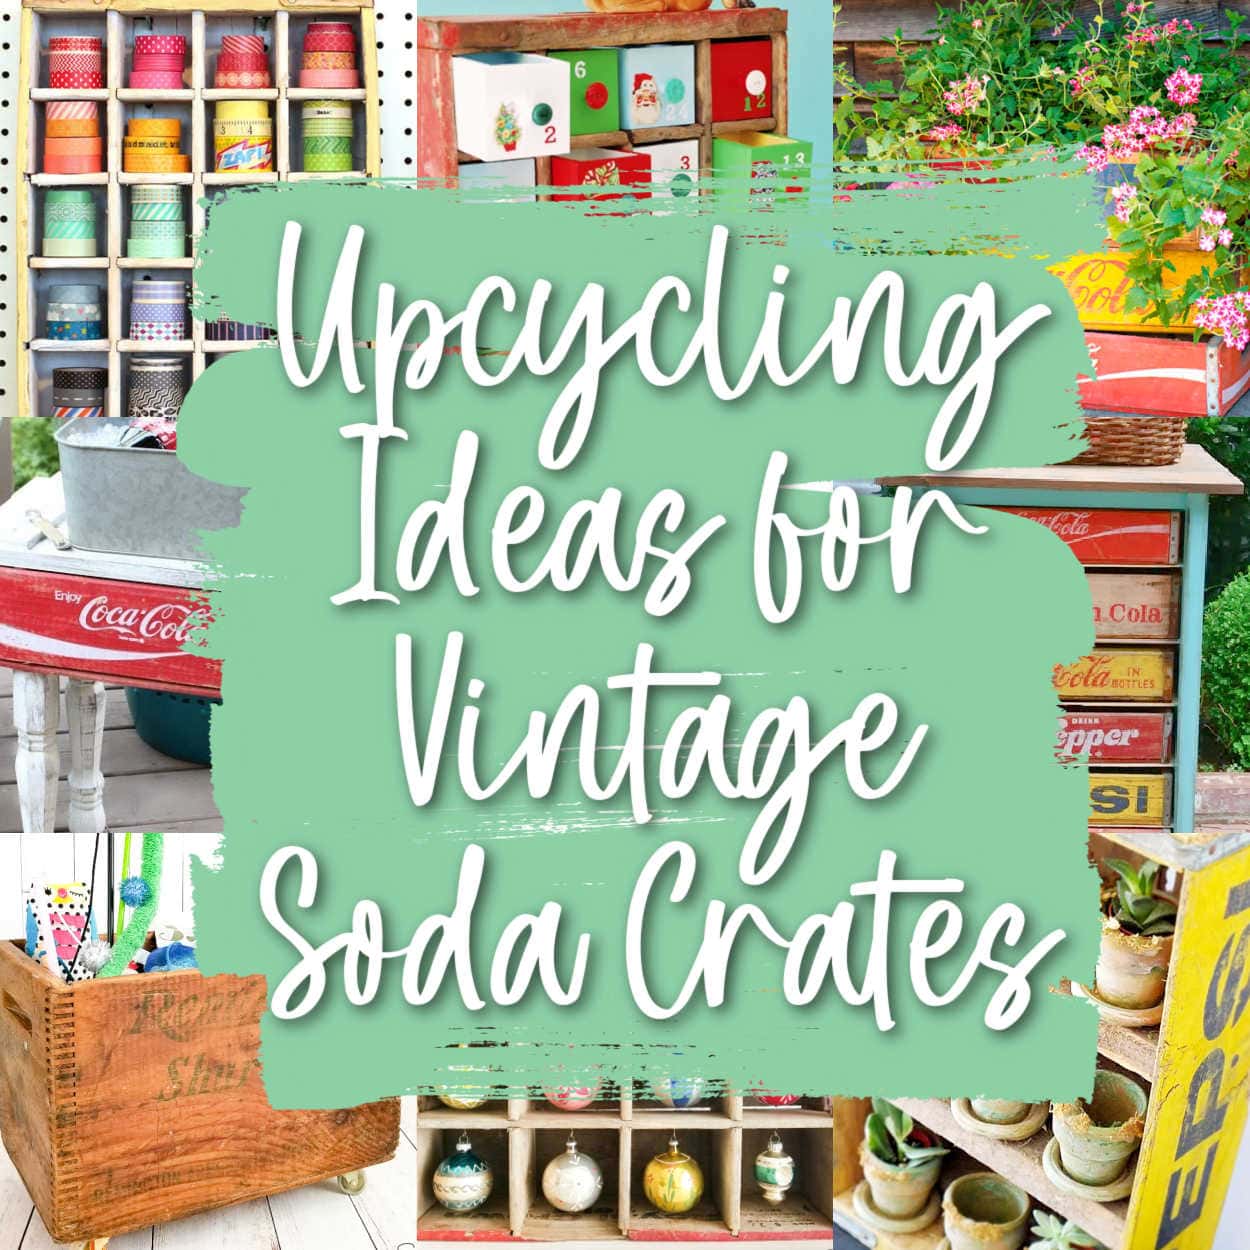 Upcycling and Repurposing Ideas for a Soda Crate